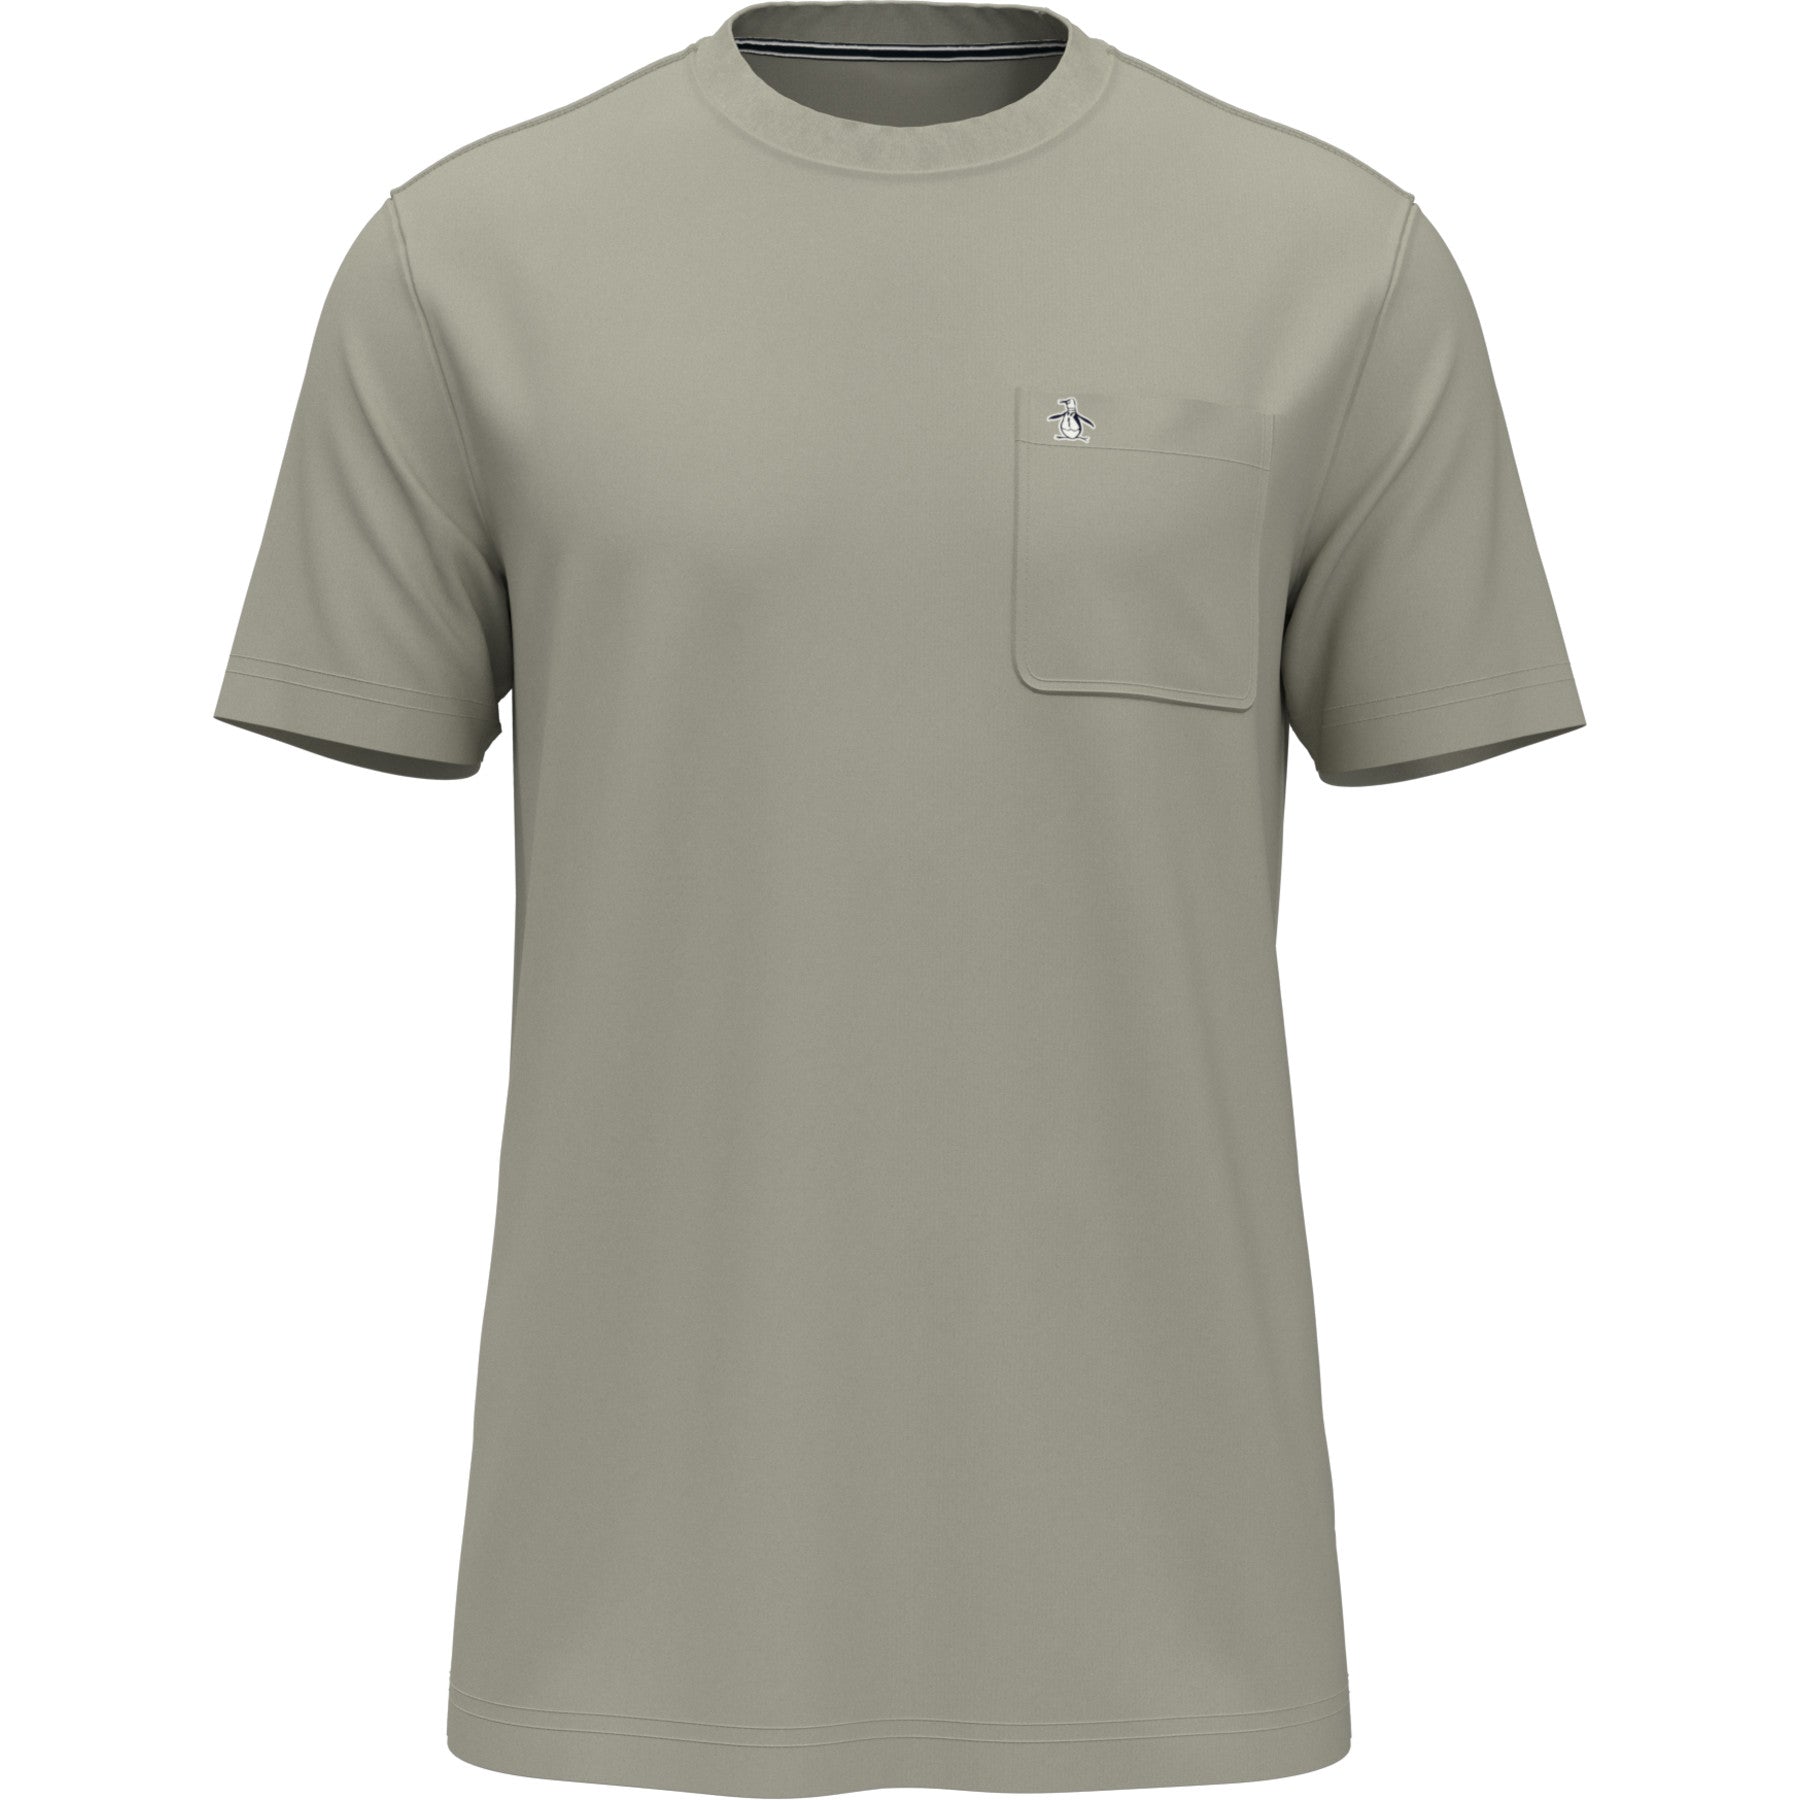 View Baby Waffle Pocket TShirt In Agate Gray information